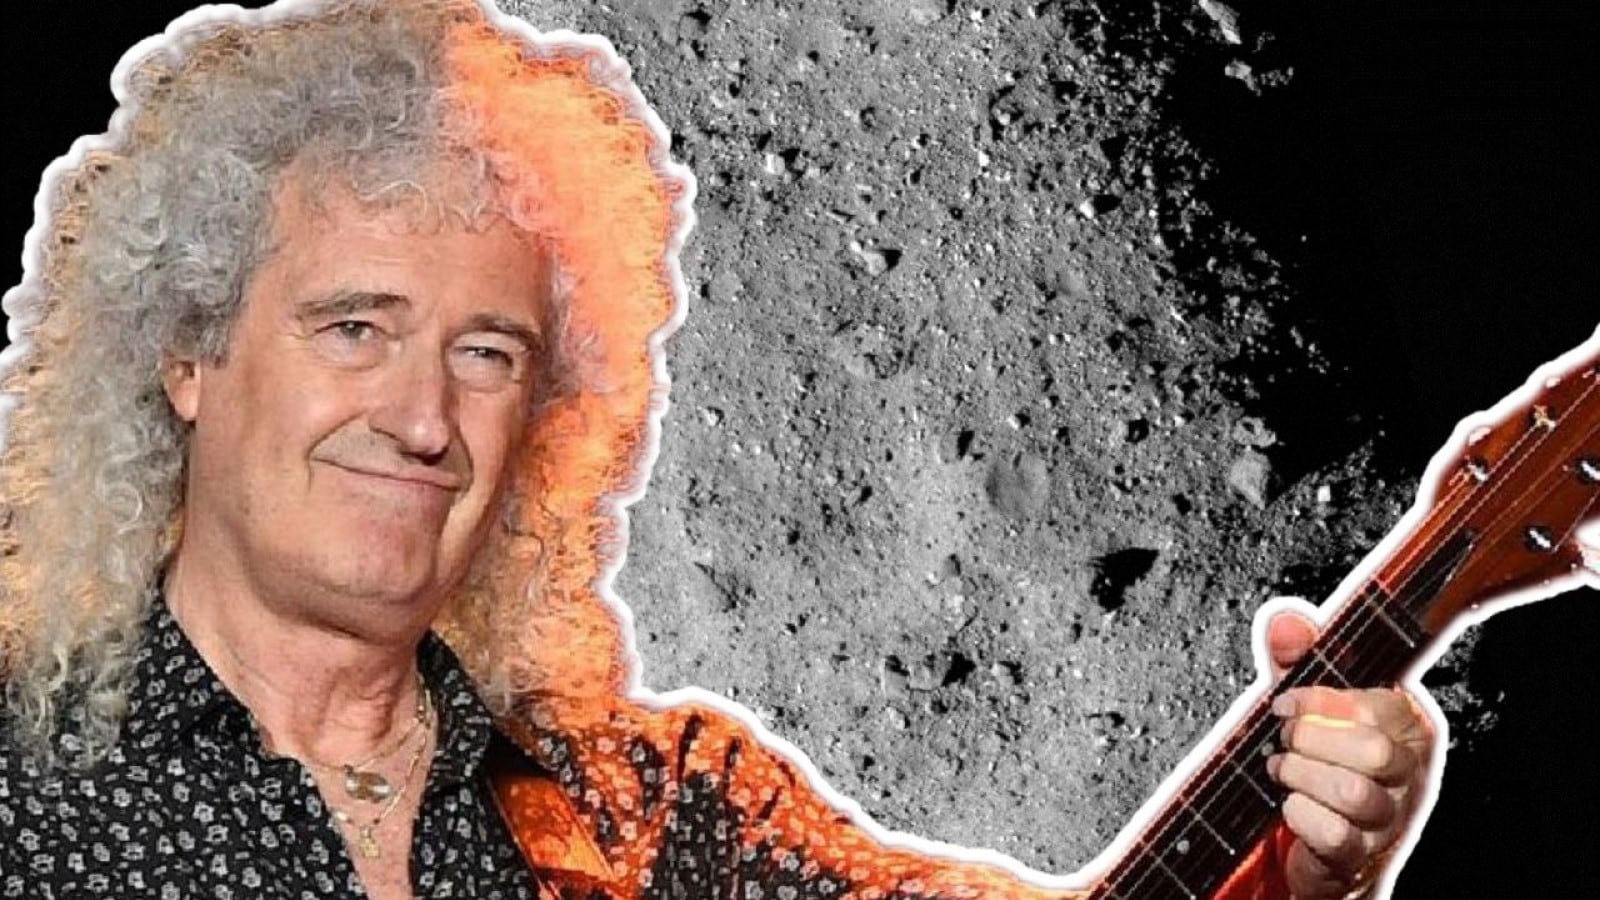 Brian May / asteroide Bennu